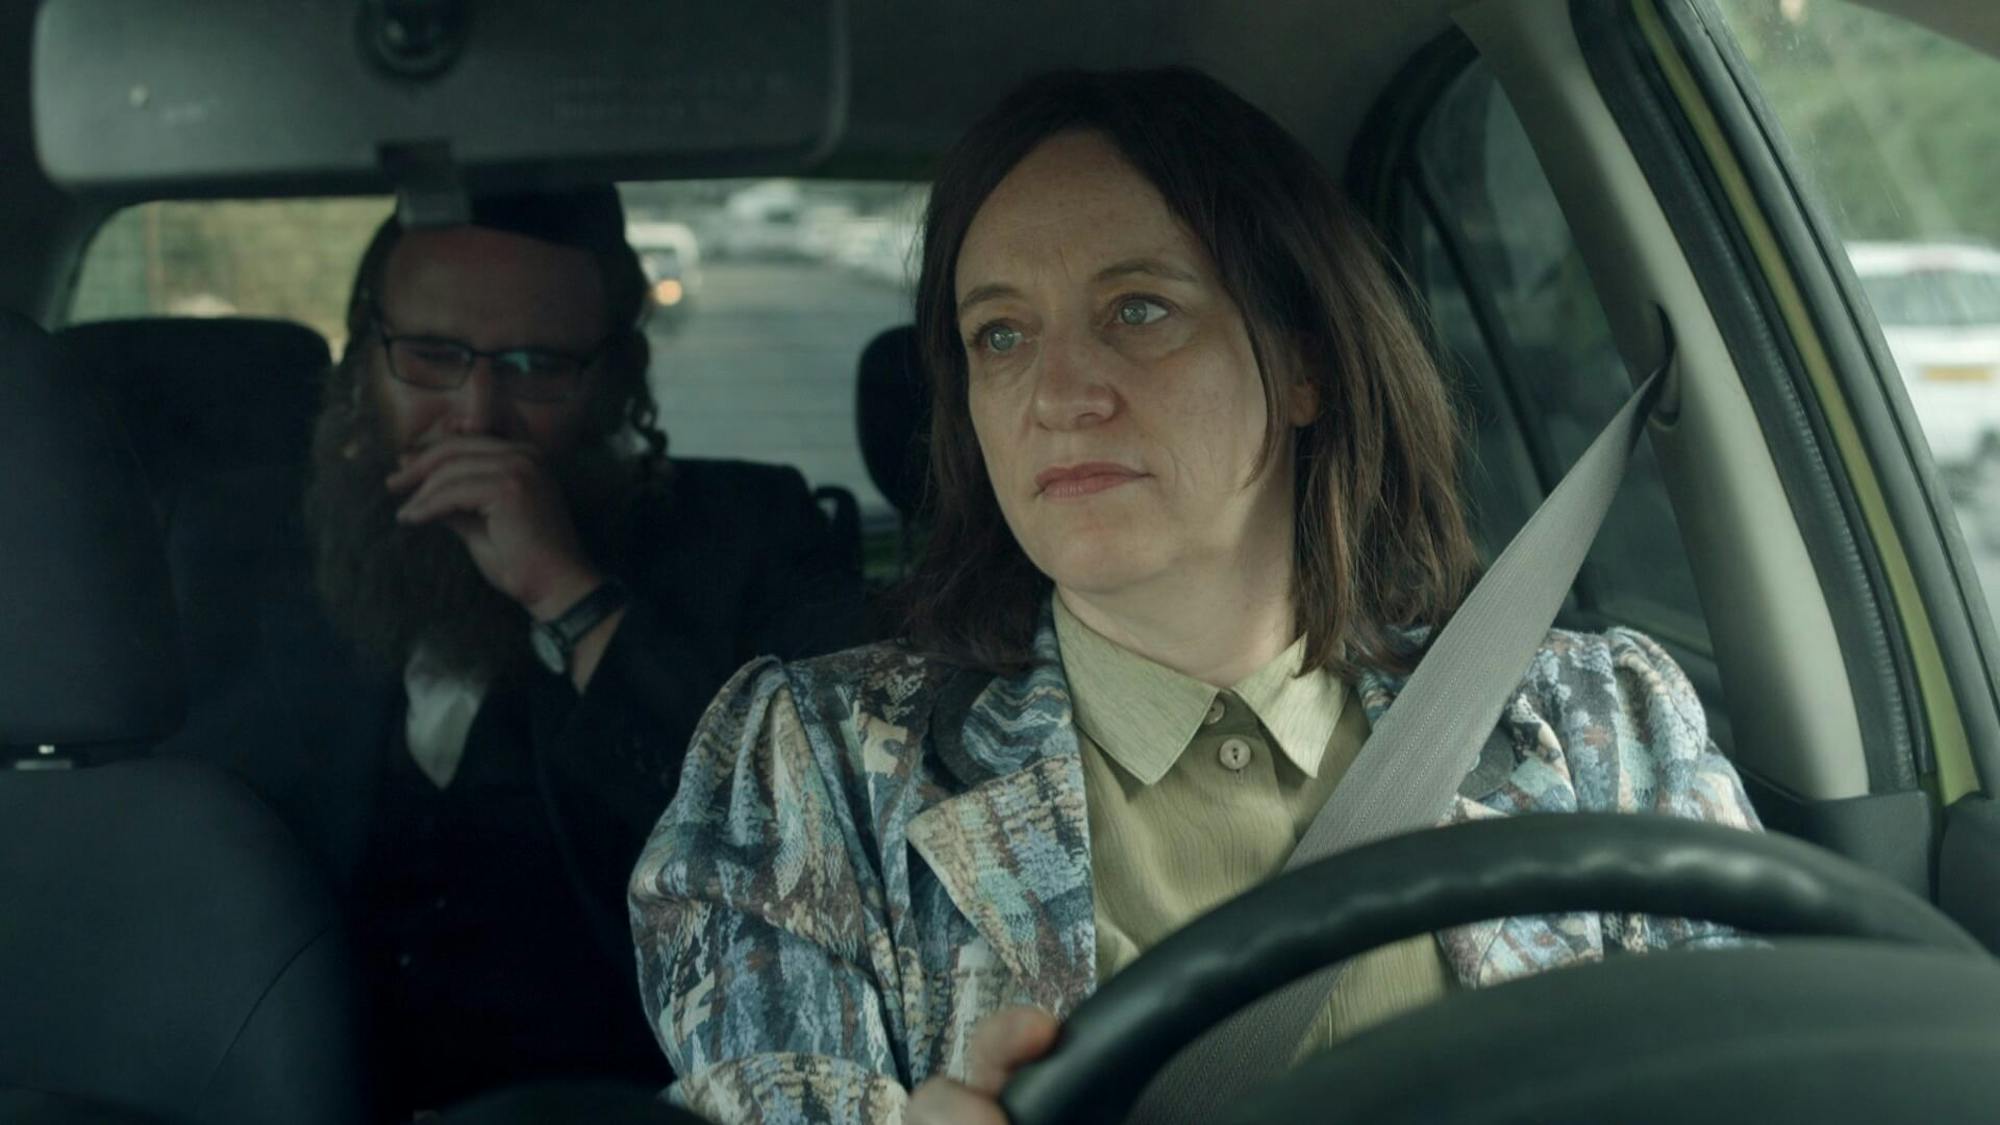 Tovi Shtisel (Eliana Shechter) sits in the front seat of the car, and Zvi Arye Shtisel (Sarel Piterman) sits in the back looking concerned.